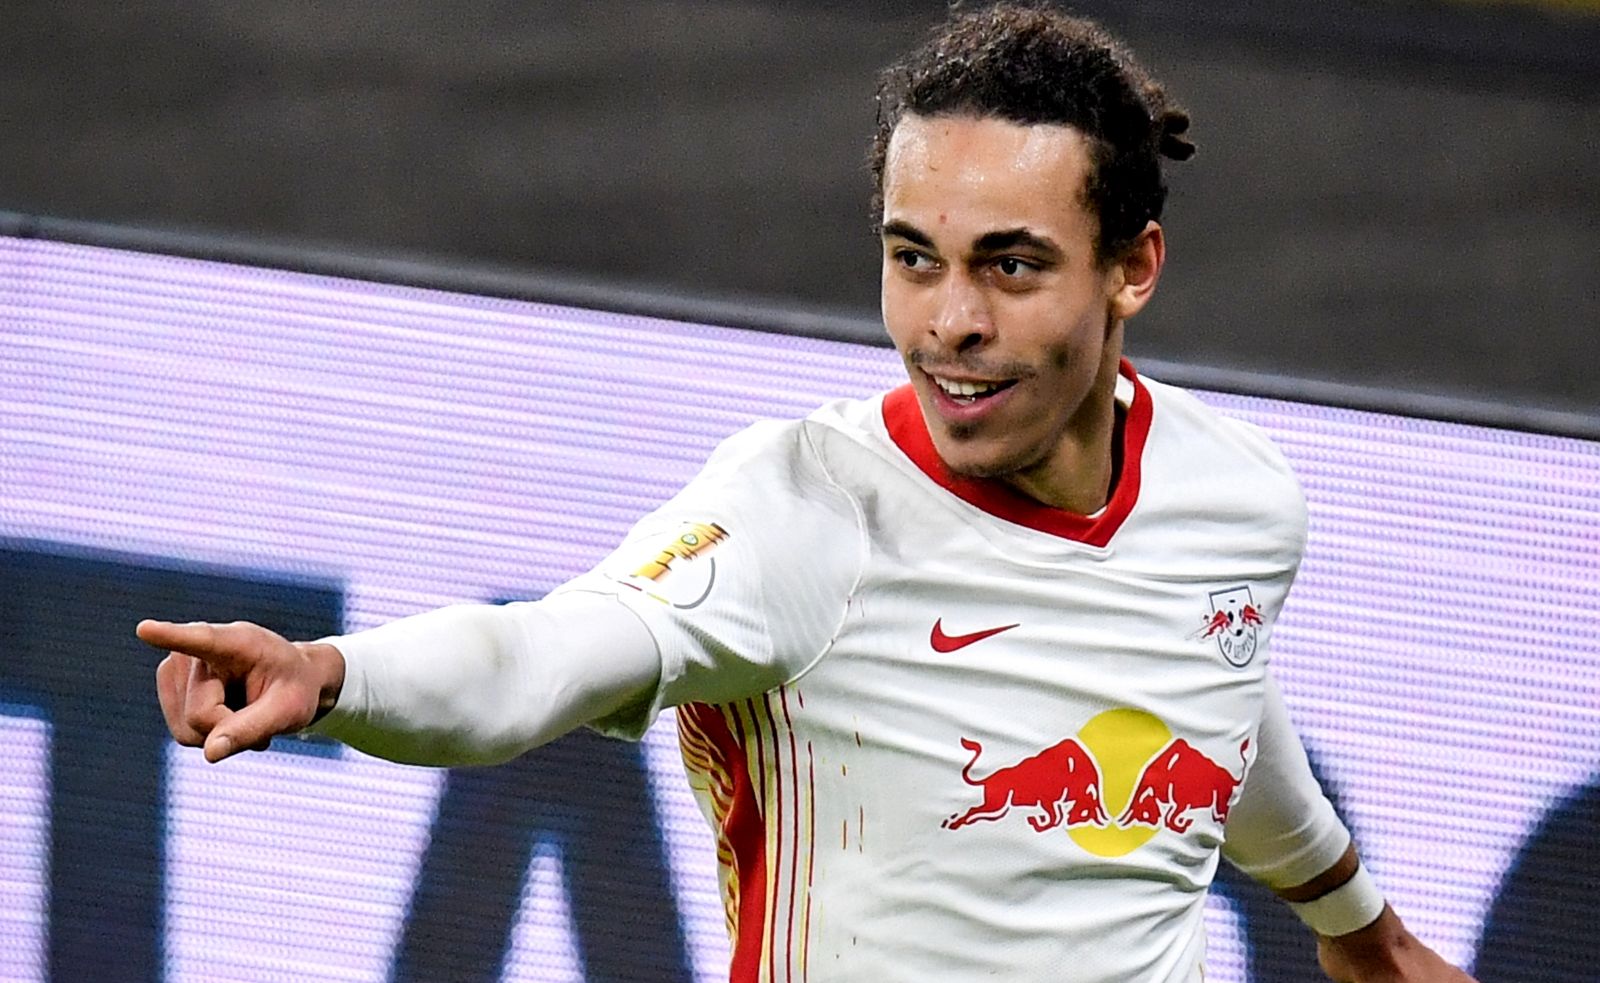 epa09049978 Leipzig's Yussuf Poulsen celebrates after scoring the 1-0 lead during the German DFB Cup quarter final soccer match between RB Leipzig and VfL Wolfsburg in Leipzig, Germany, 03 March 2021.  EPA/STUART FRANKLIN / POOL DFB regulations prohibit any use of photographs as image sequences and/or quasi-video.